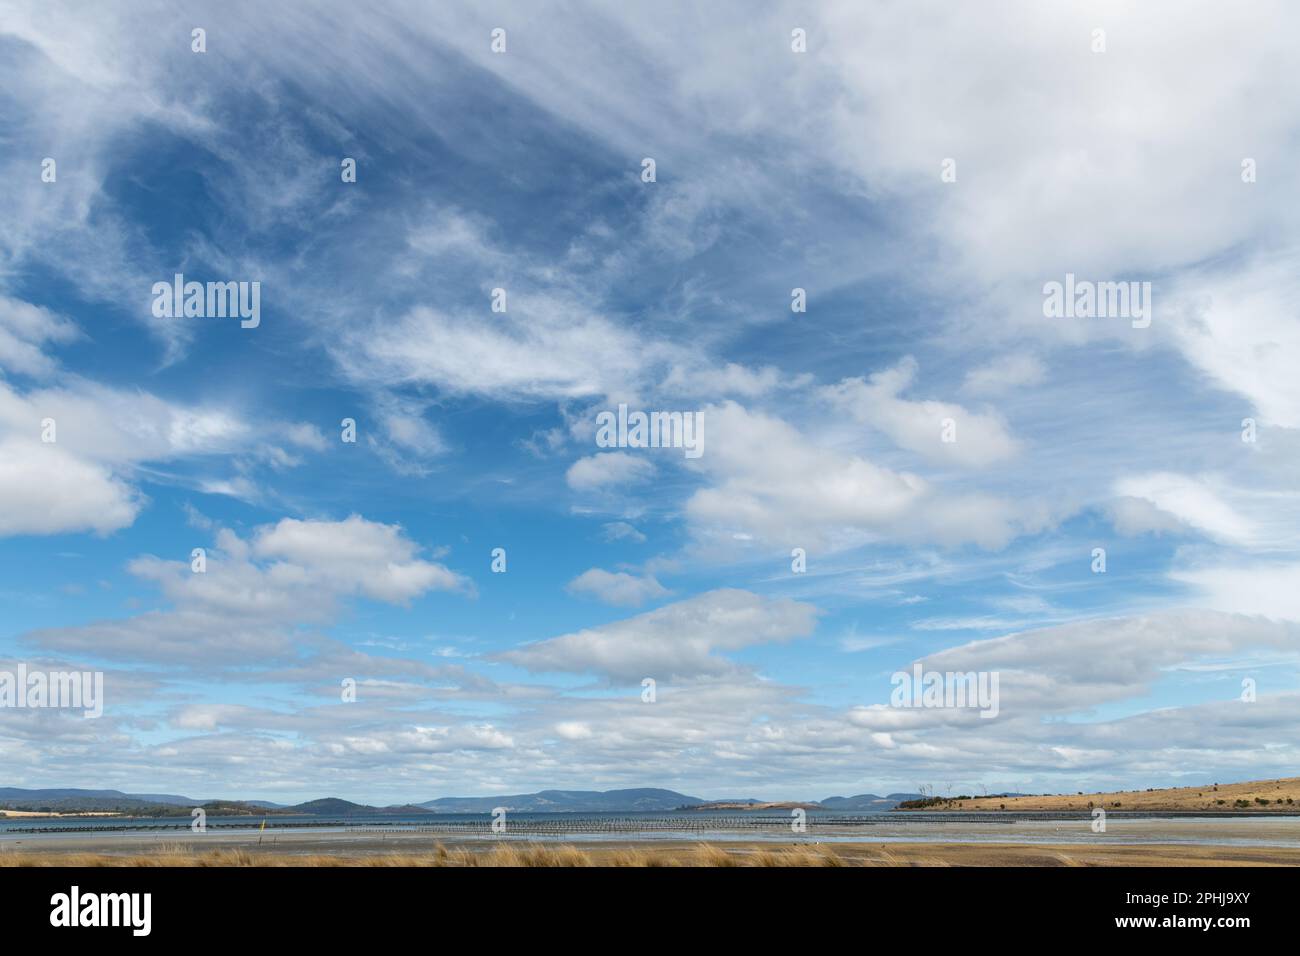 Large wispy sky in a landscape scene with oyster frames at low tide in Tasmania, Australia. sky replacement. Stock Photo